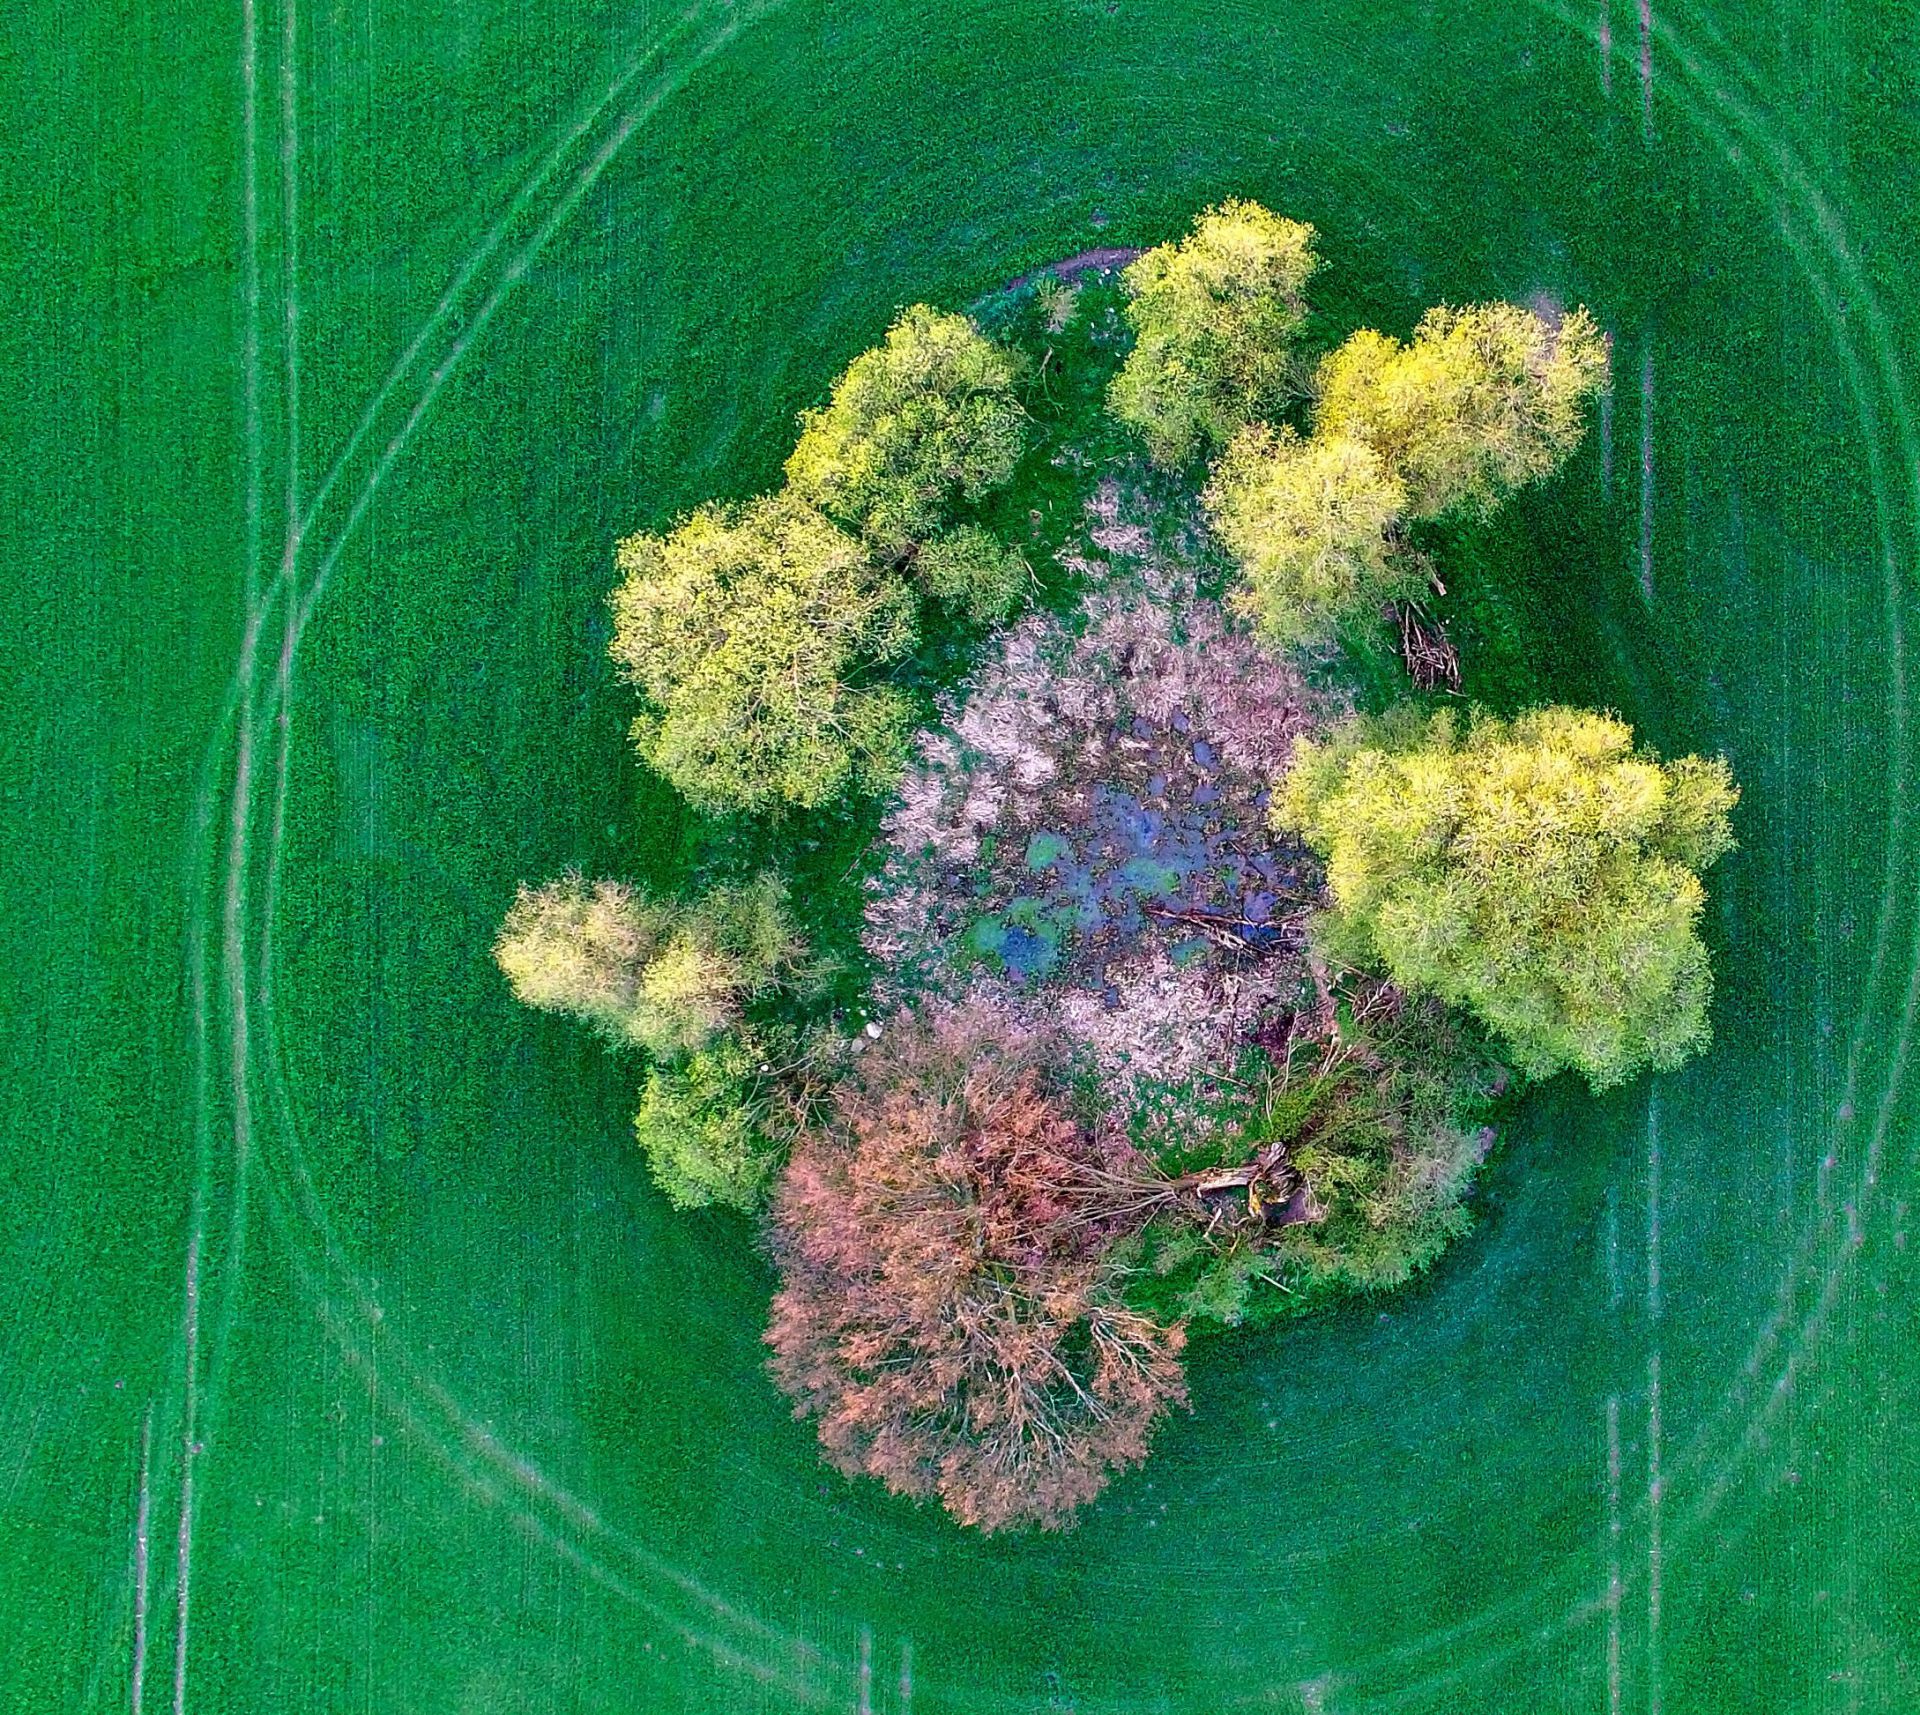 epa05259587 An aerial view shows a pond surrounded by trees in a field near Sieversdorf, Brandenburg, Germany, 14 April 2016. Such natural environments form ecologically valuable habitats in heavily used agricultural areas.  EPA/PATRICK PLEUL